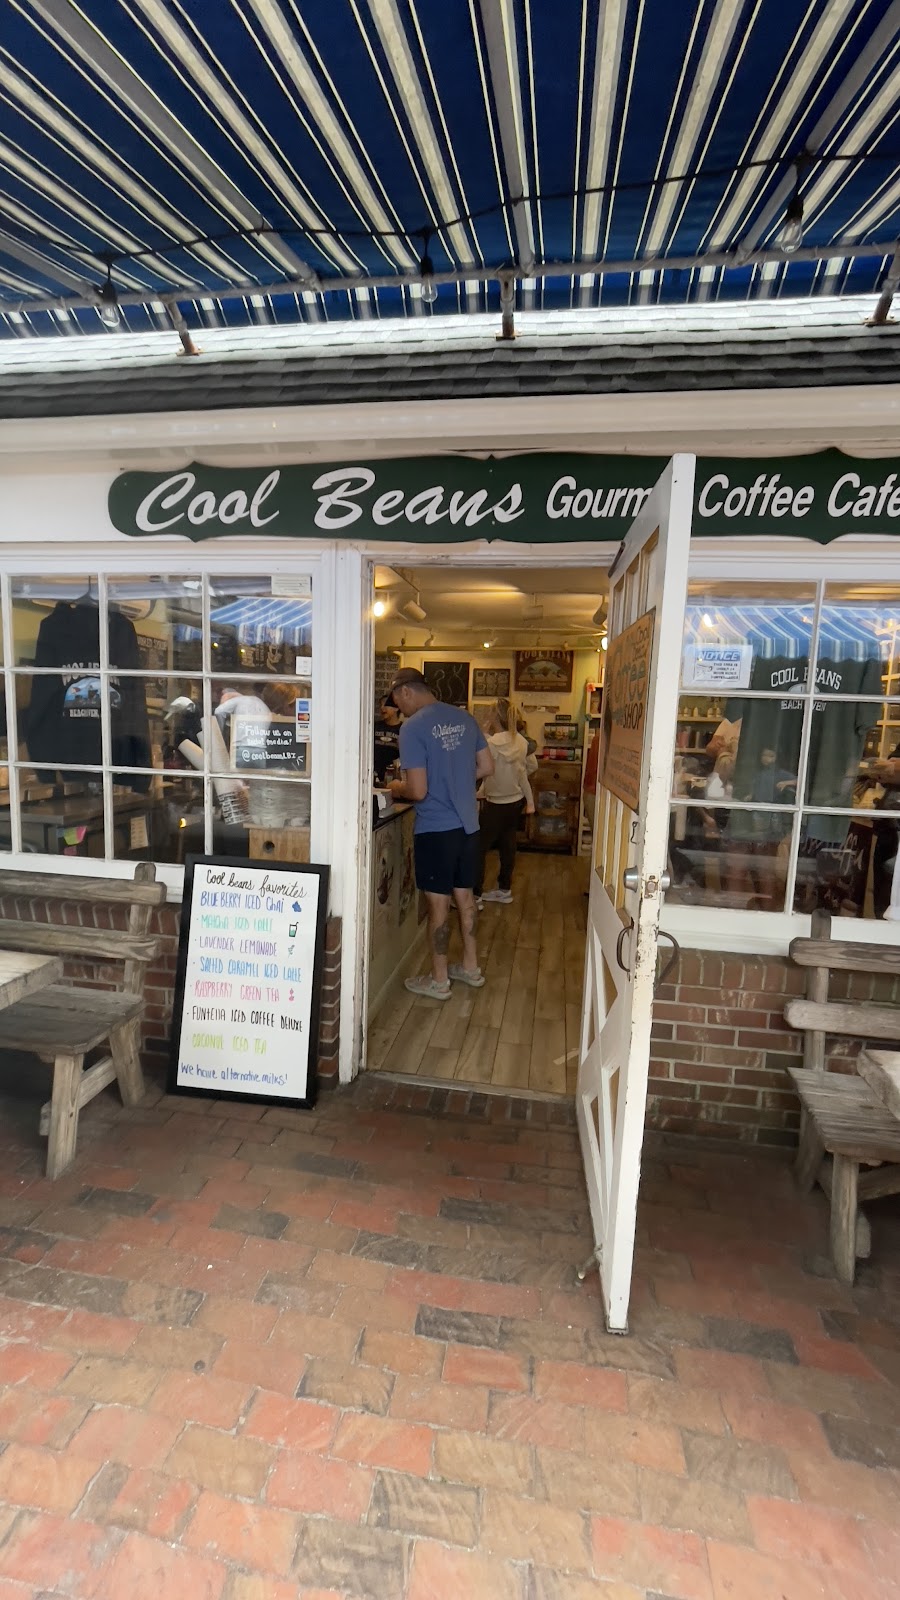 Cool Beans Coffee Shop | 830 N Bay Ave&, 9th St Suite 5, Beach Haven, NJ 08008 | Phone: (609) 492-8090